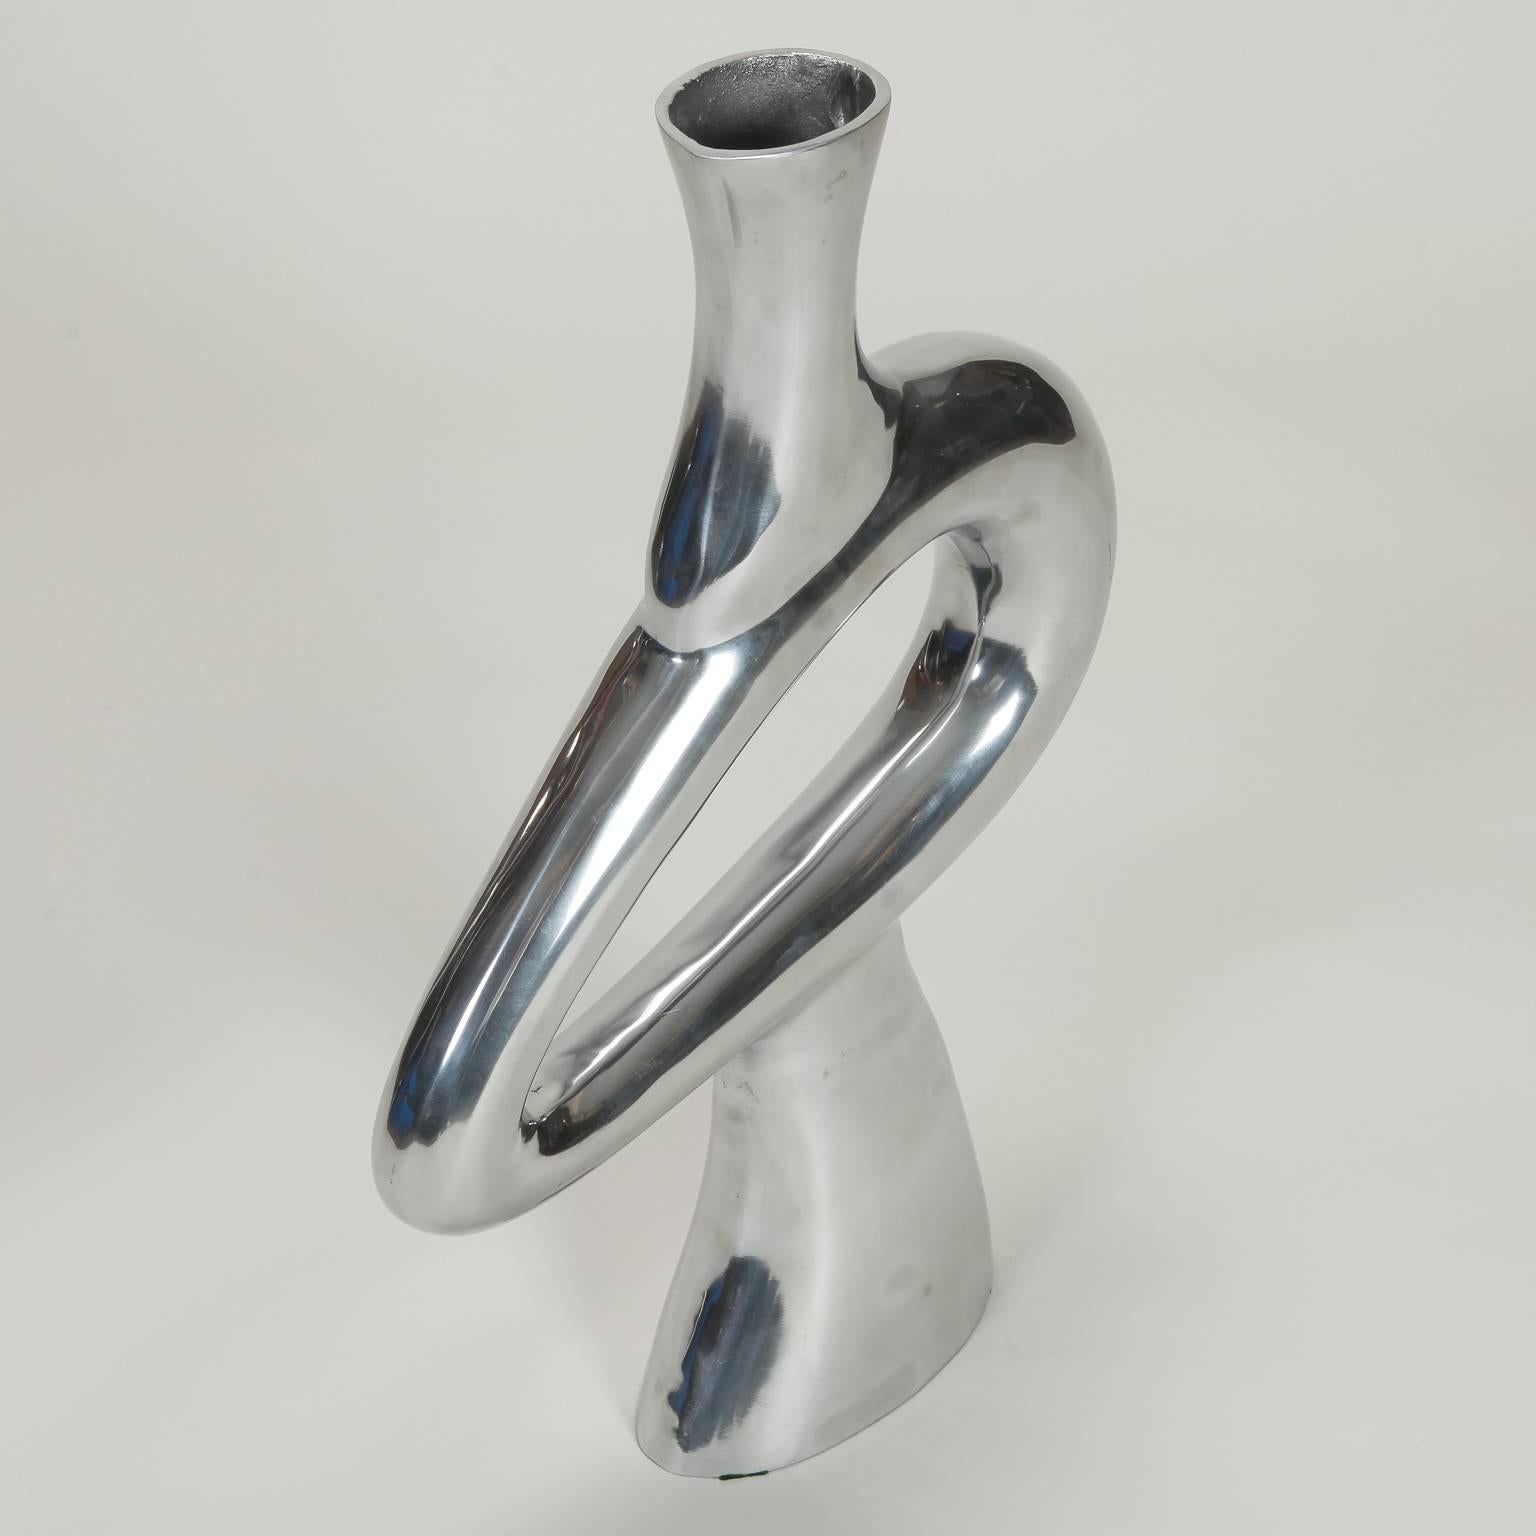 Sculptural metal vase stands two feet tall and has a center free form open loop and polished steel finish, circa 1970s.
     